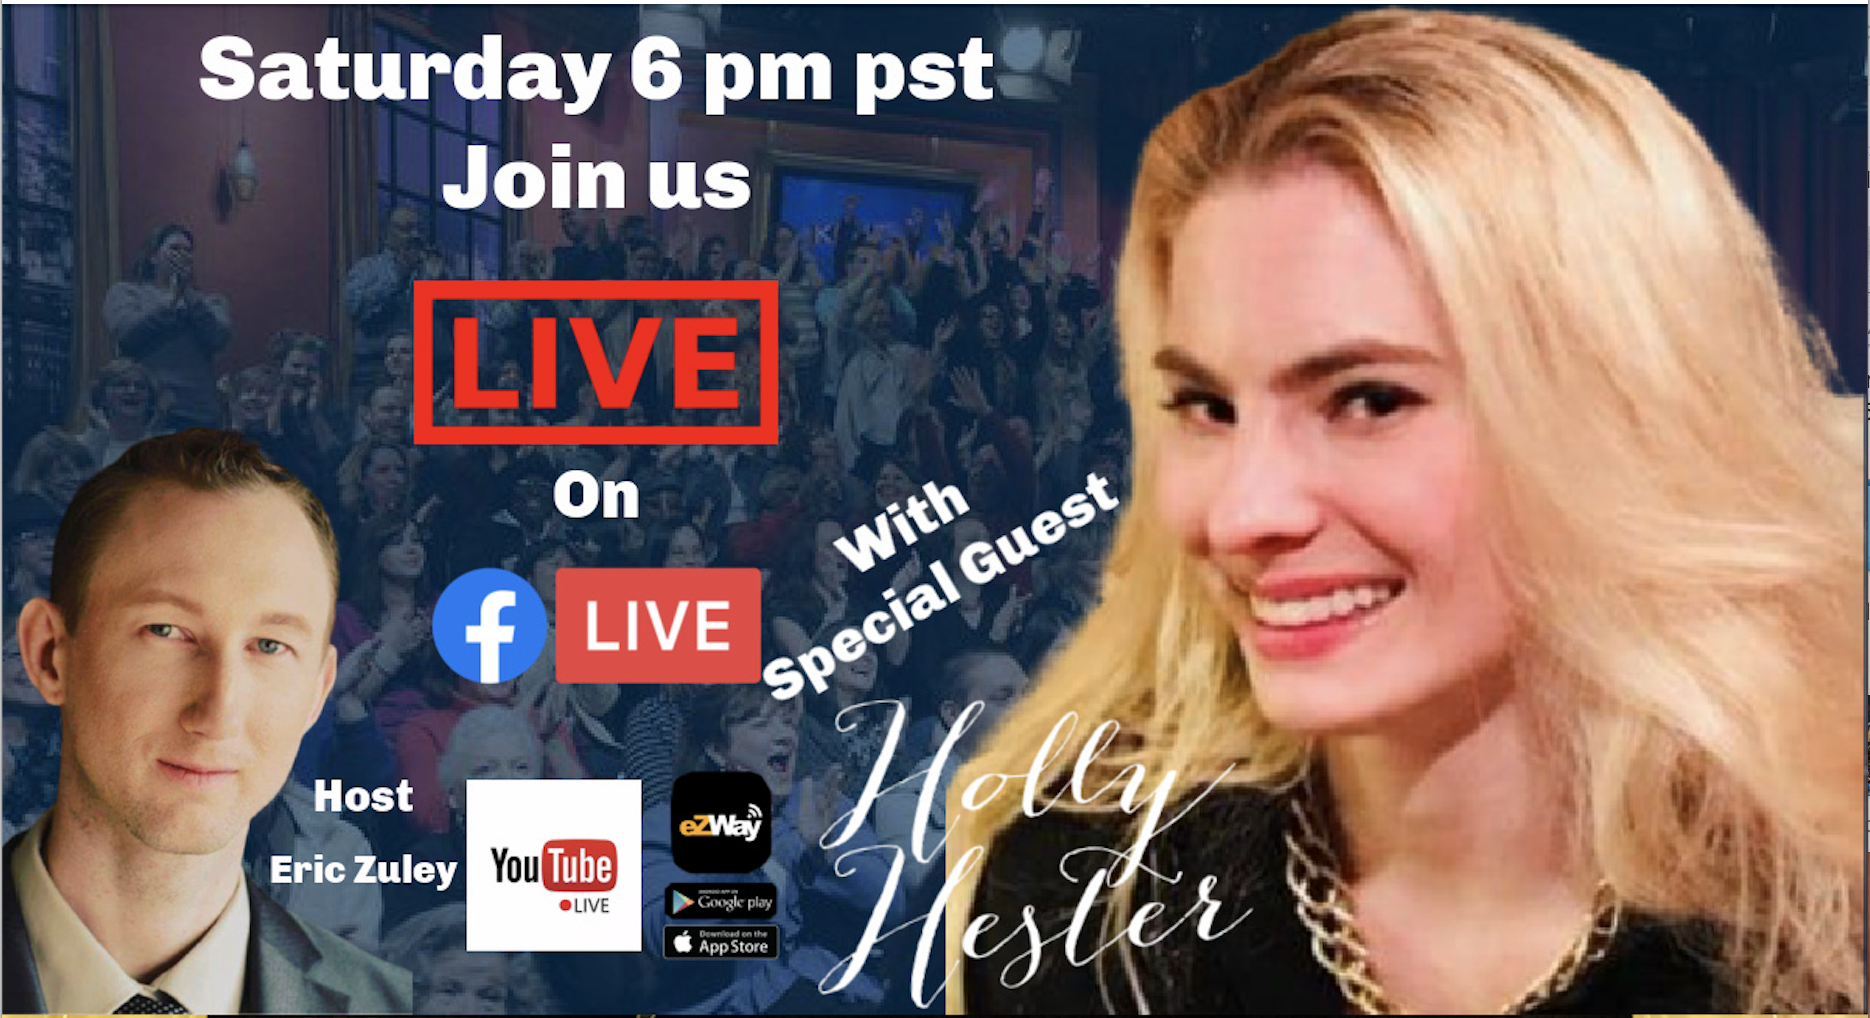 Minister Holly Hester eZWay Live Interview